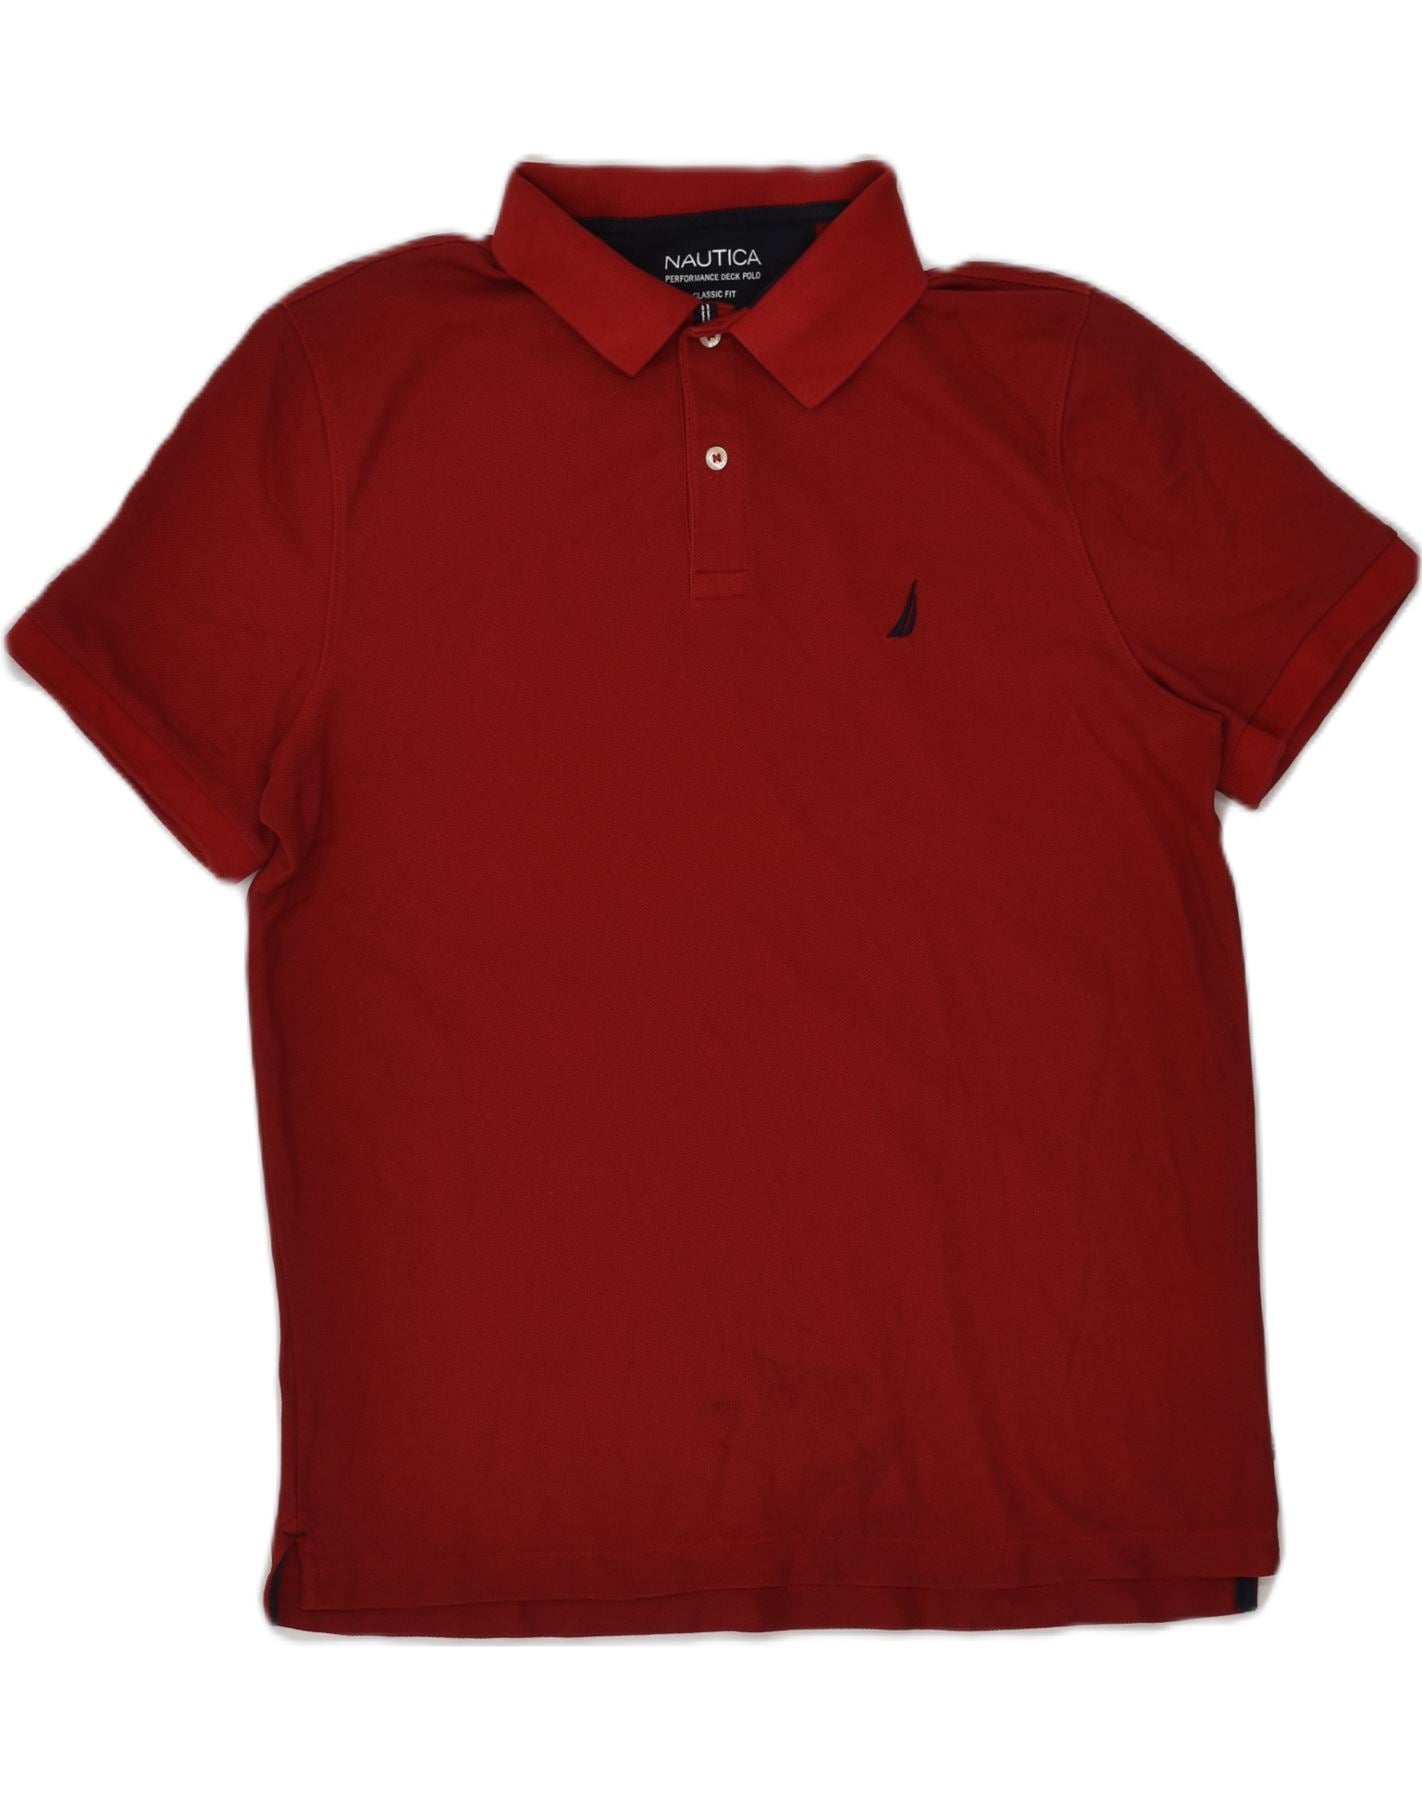 NAUTICA Mens Classic Fit Polo Shirt Large Maroon Cotton